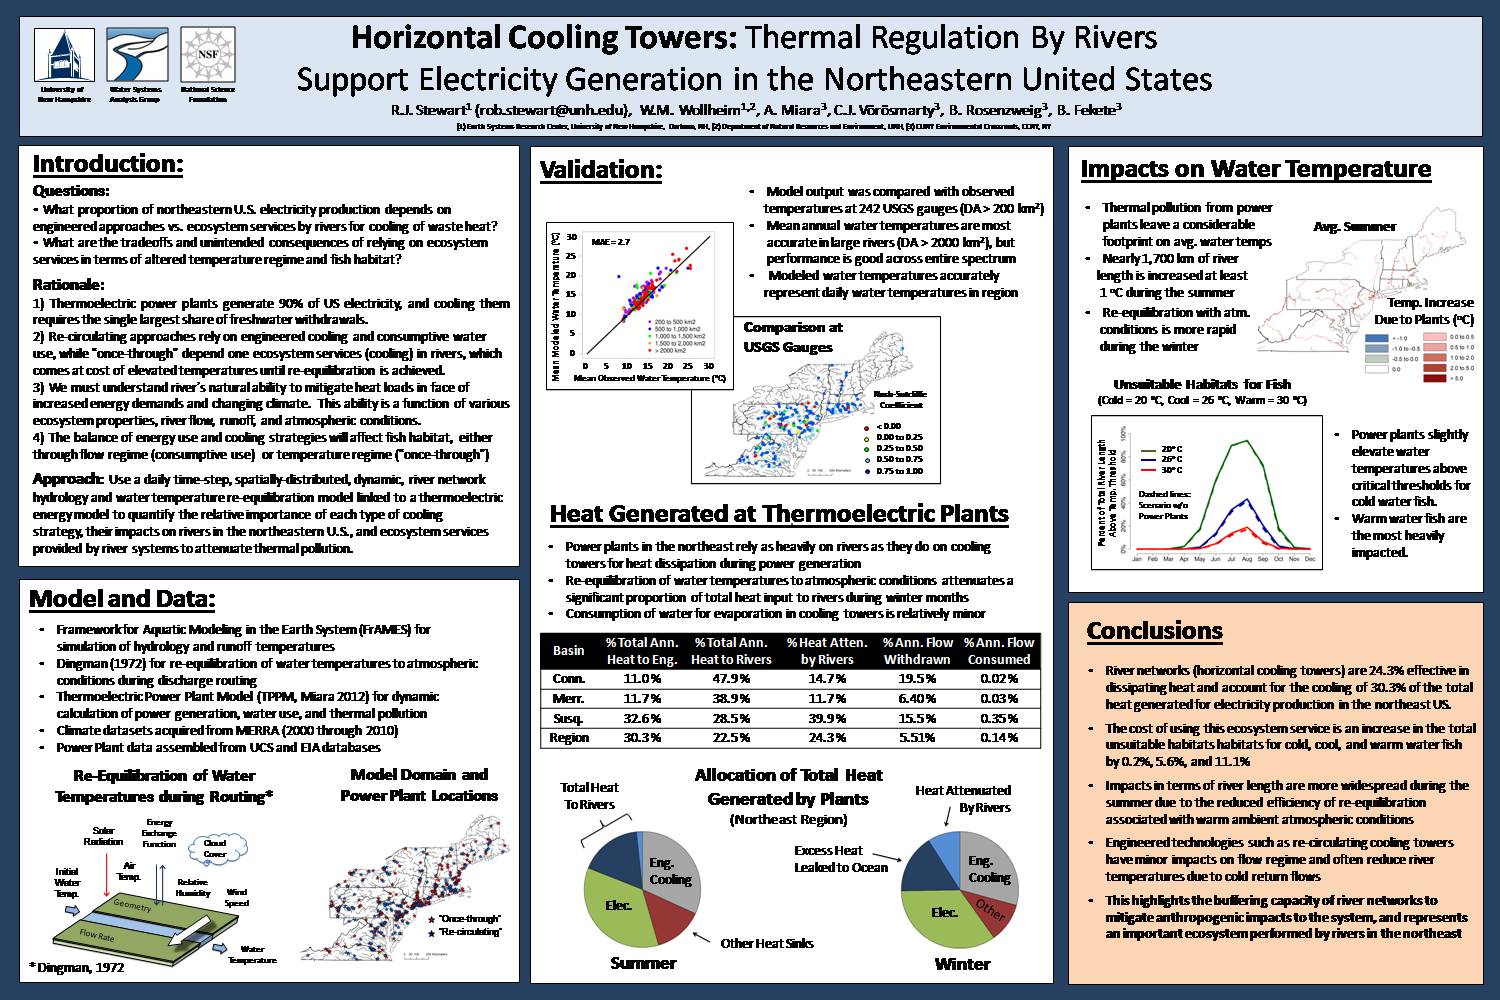 Horizontal Cooling Towers: Thermal Regulation By Rivers Support Electricity Generation In The Northeastern Us by stewart